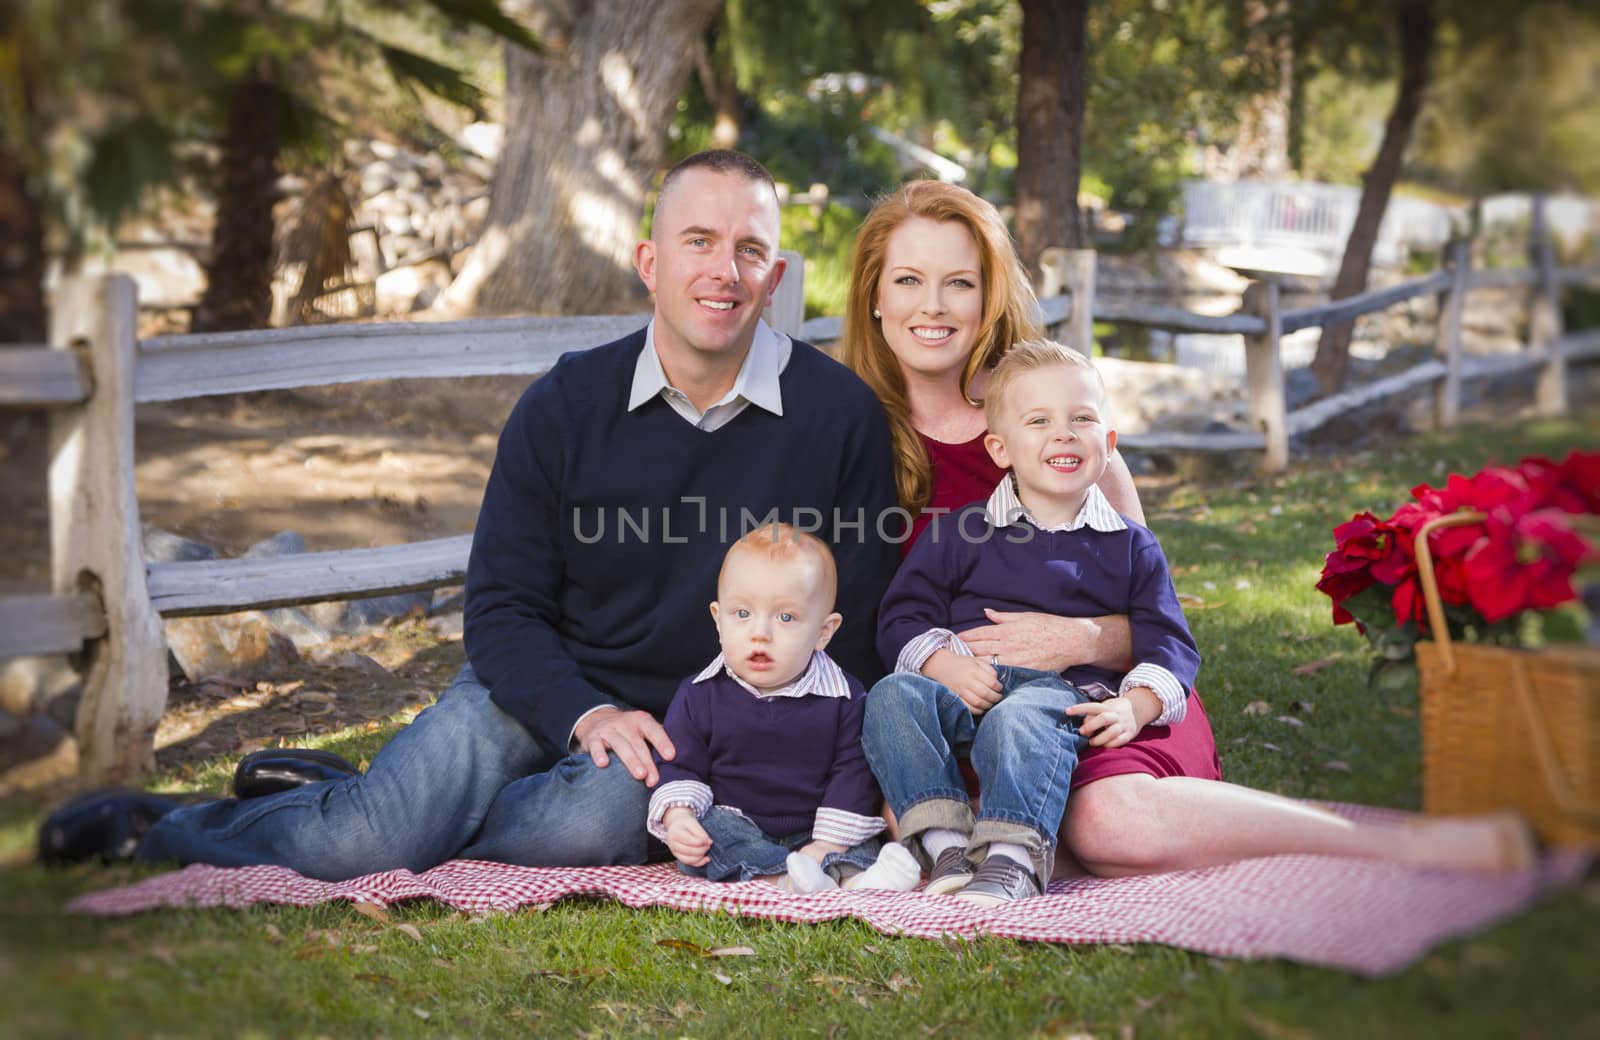 Beautiful Small Young Family Holiday Portrait in the Park.